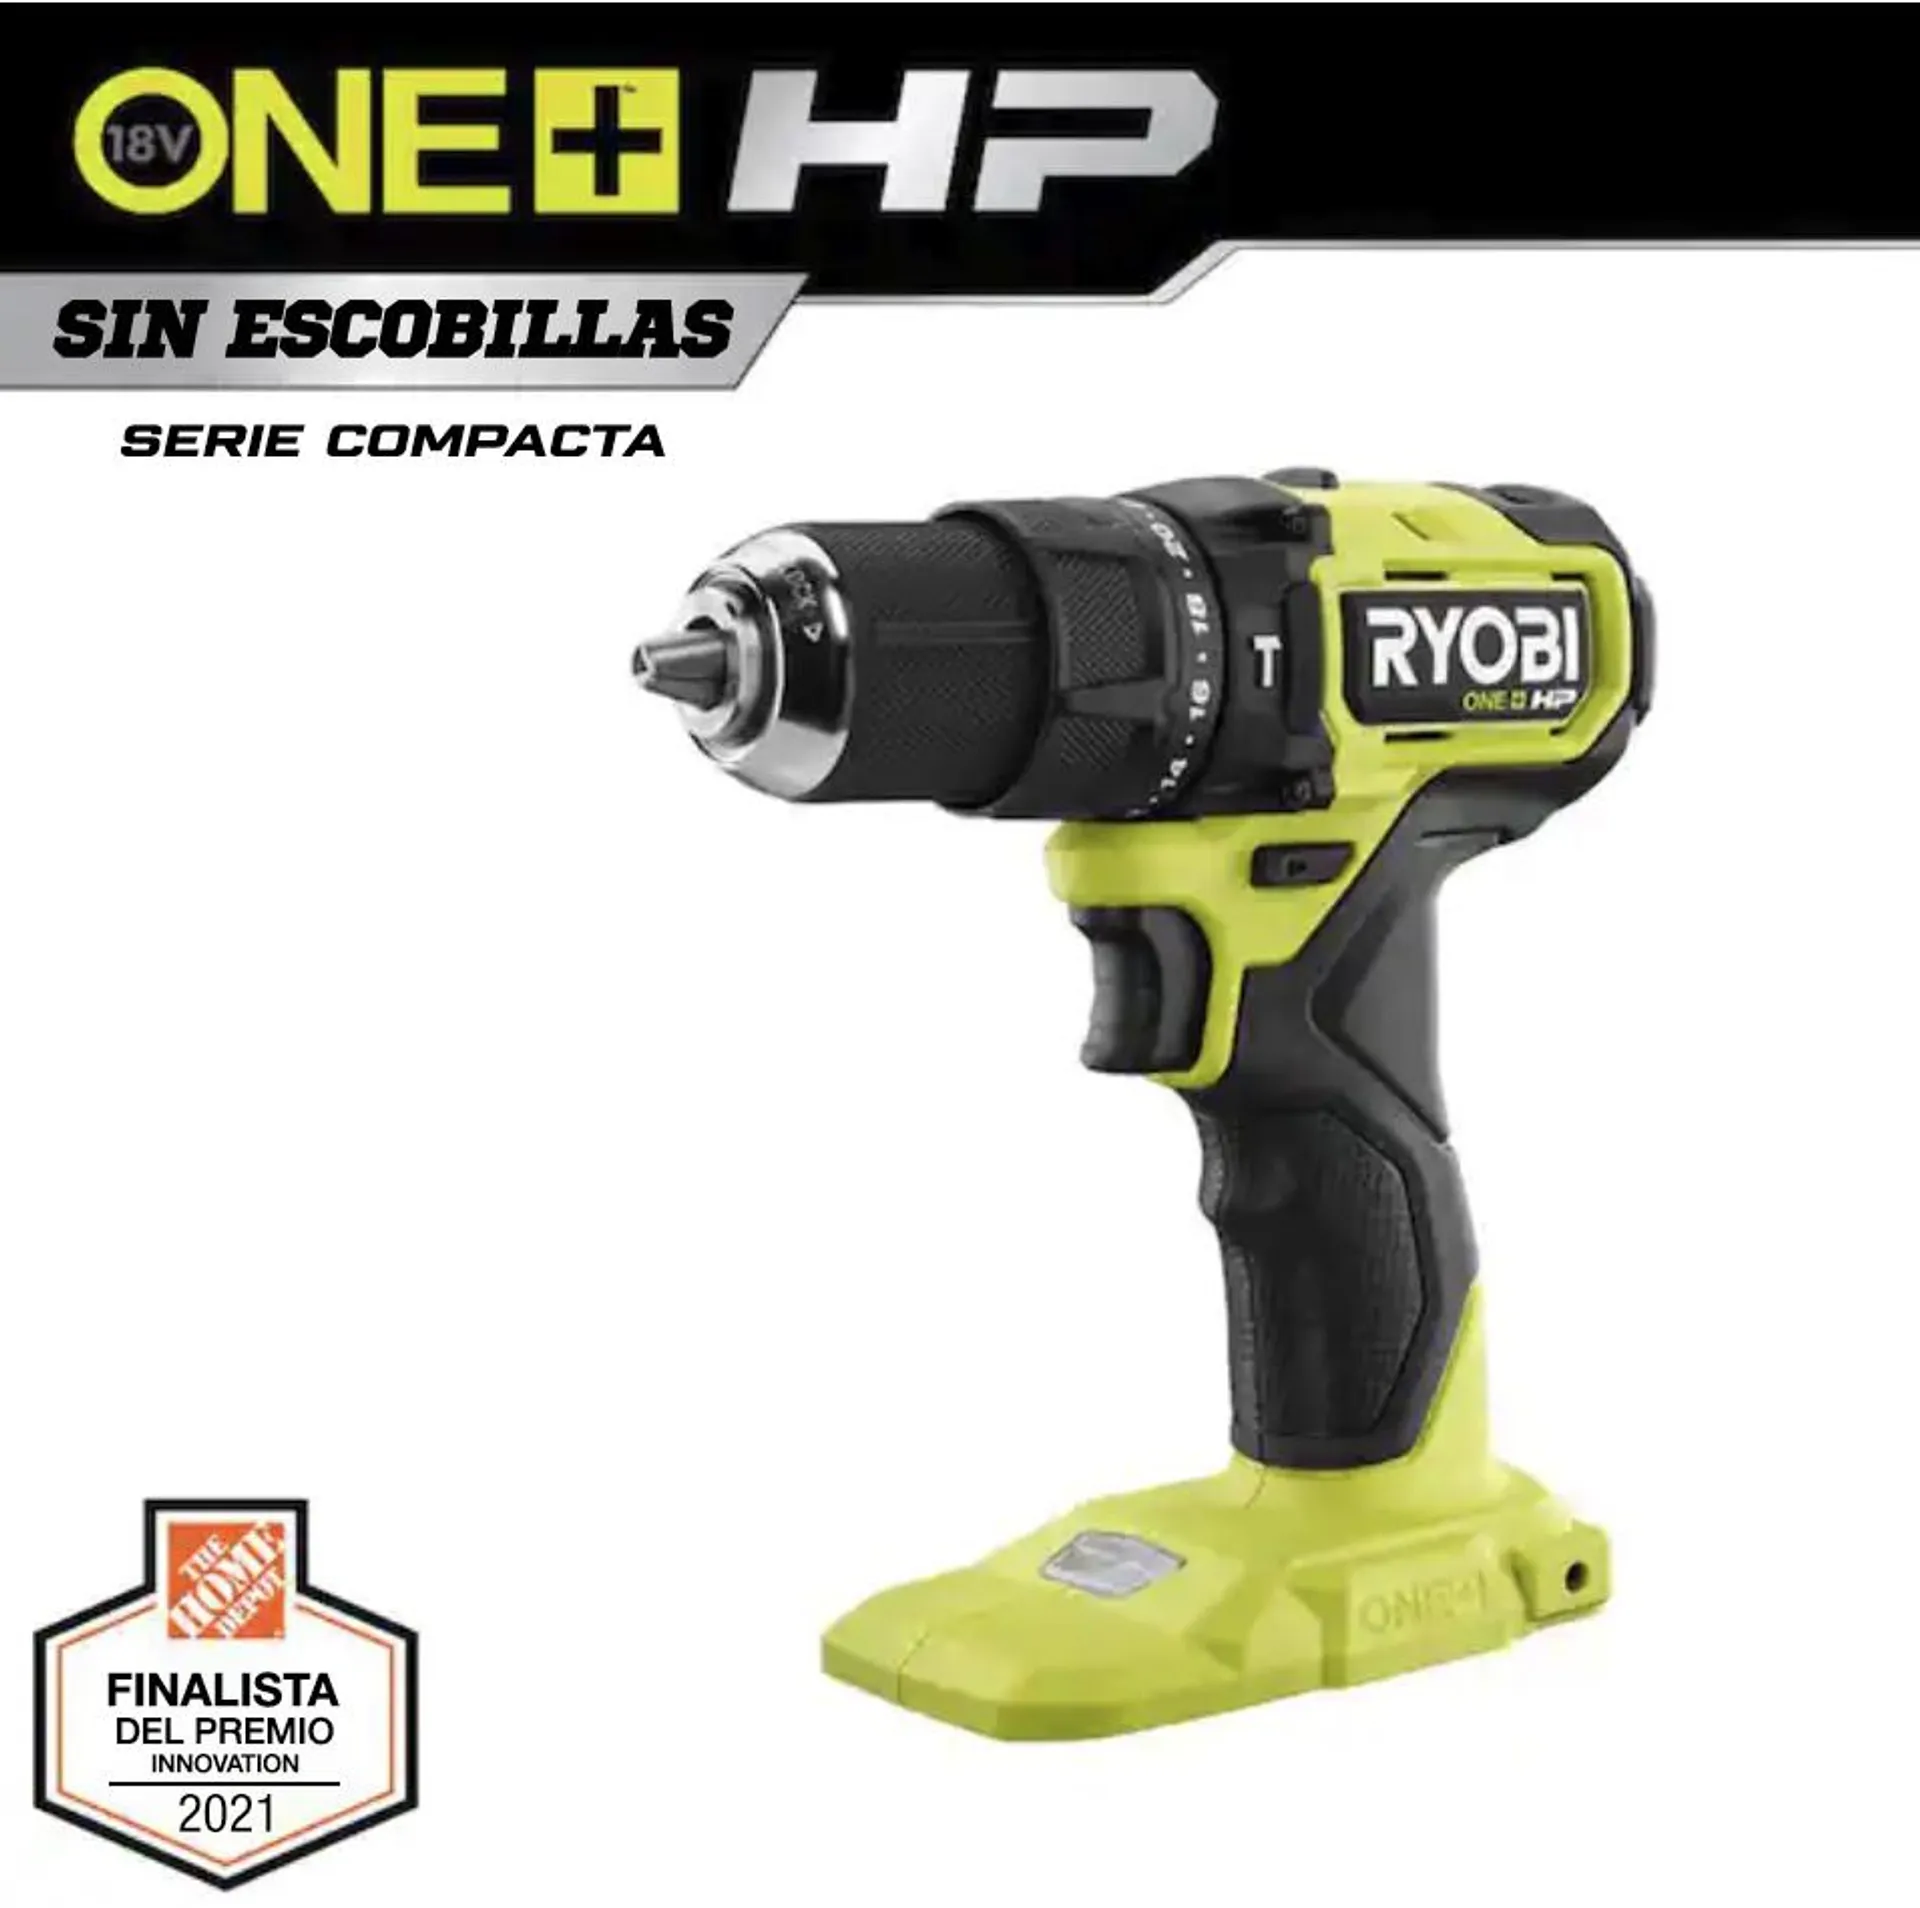 ONE+ HP COMPACT BRUSHLESS 1/2" HAMMER DRILL